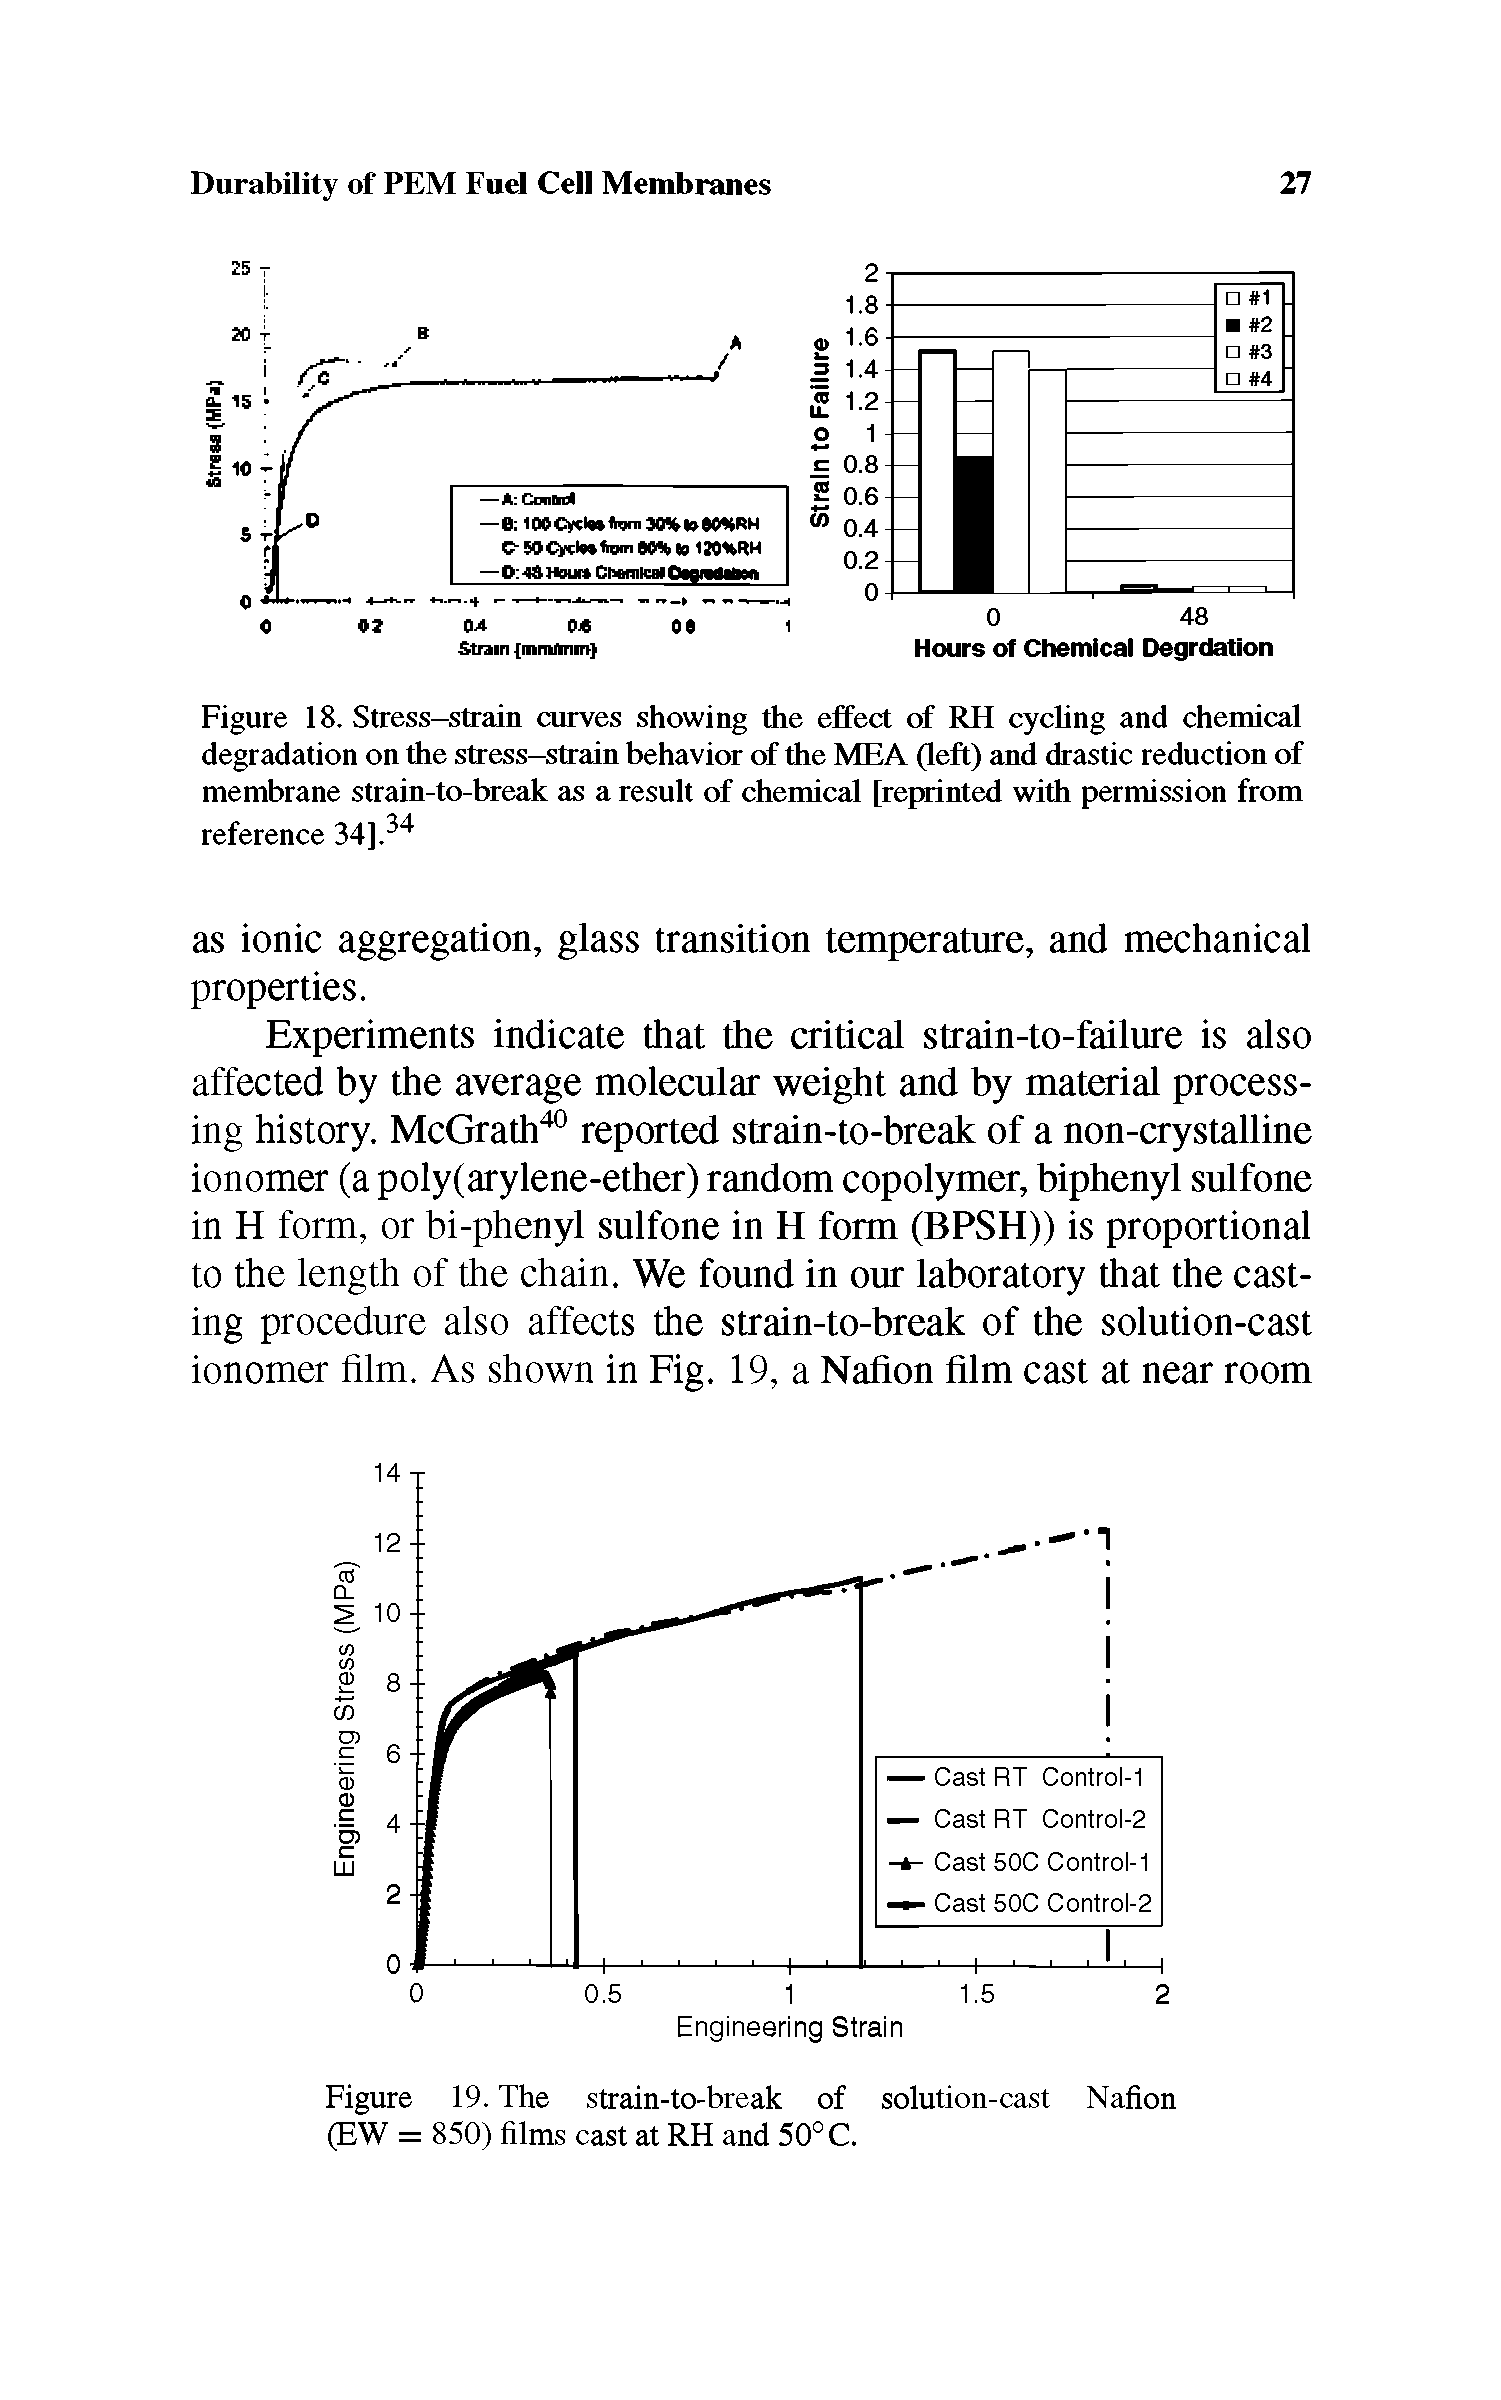 Figure 18. Stress-strain curves showing the effect of RH cycling and chemical degradation on the stress-strain behavior of the MEA (left) and drastic reduction of membrane strain-to-break as a result of chemical [reprinted with permission from reference 34].34...